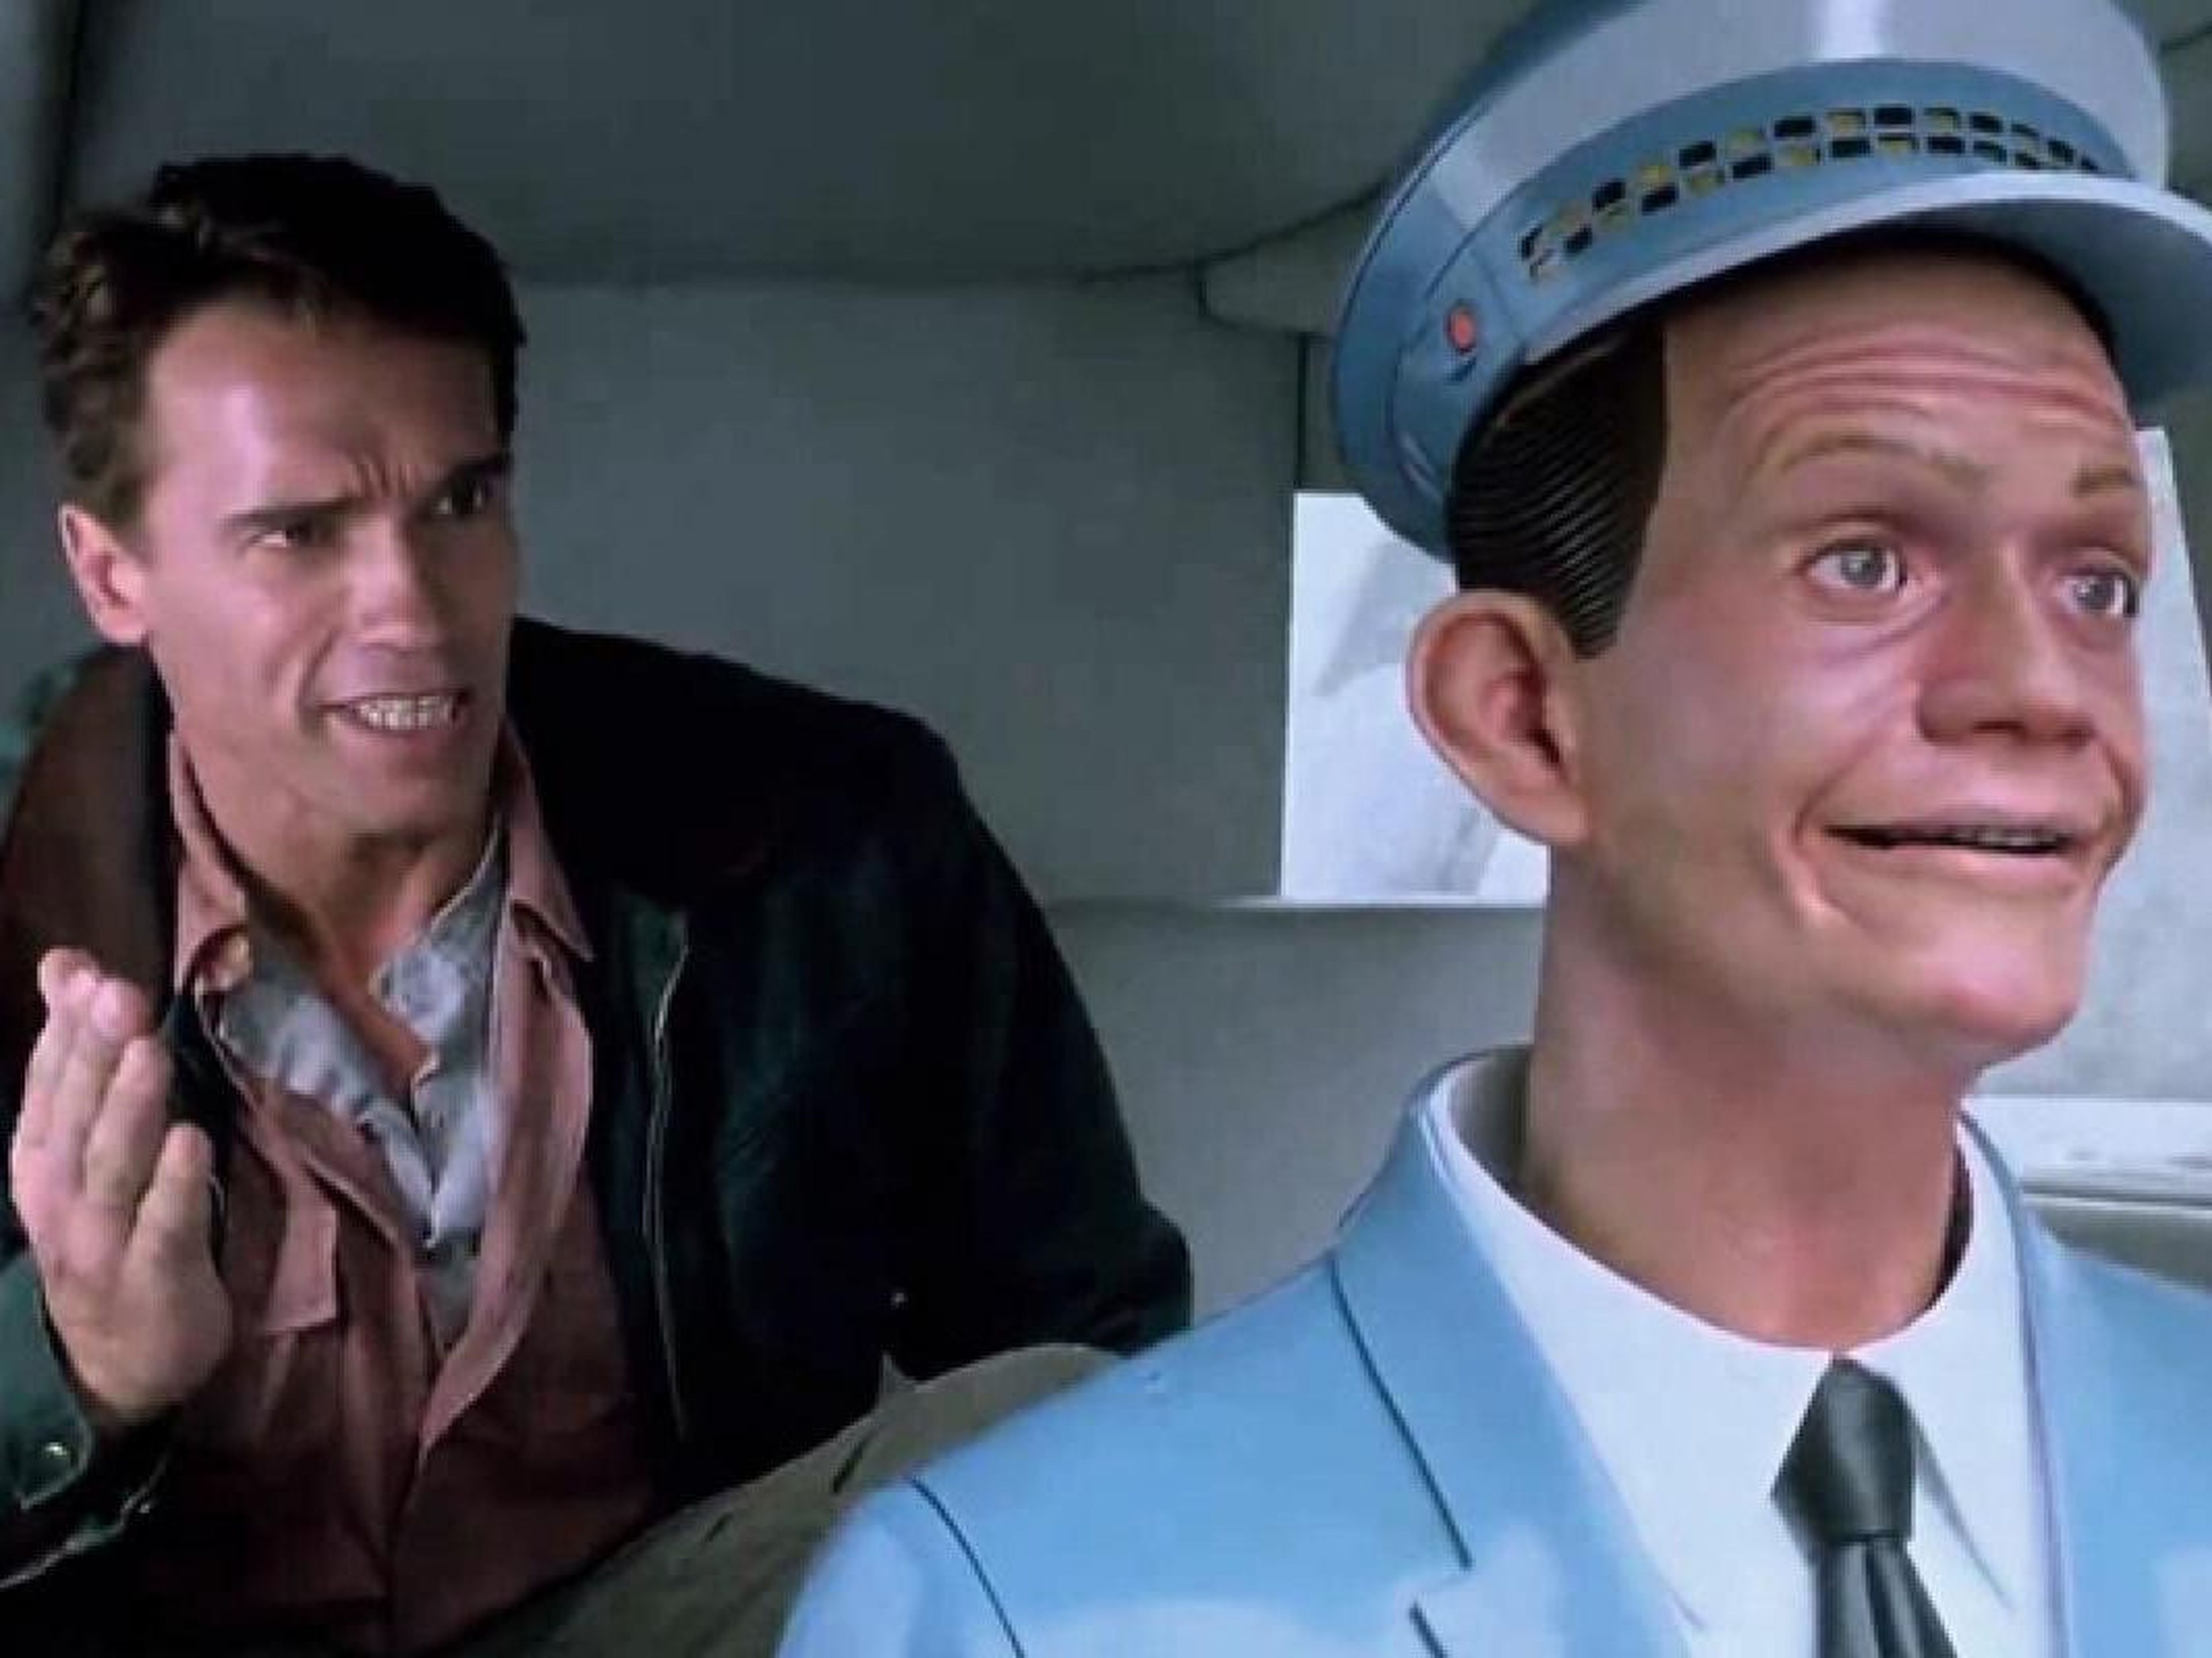 The 1990 film "Total Recall" may have predicted the rise of self-driving cars.